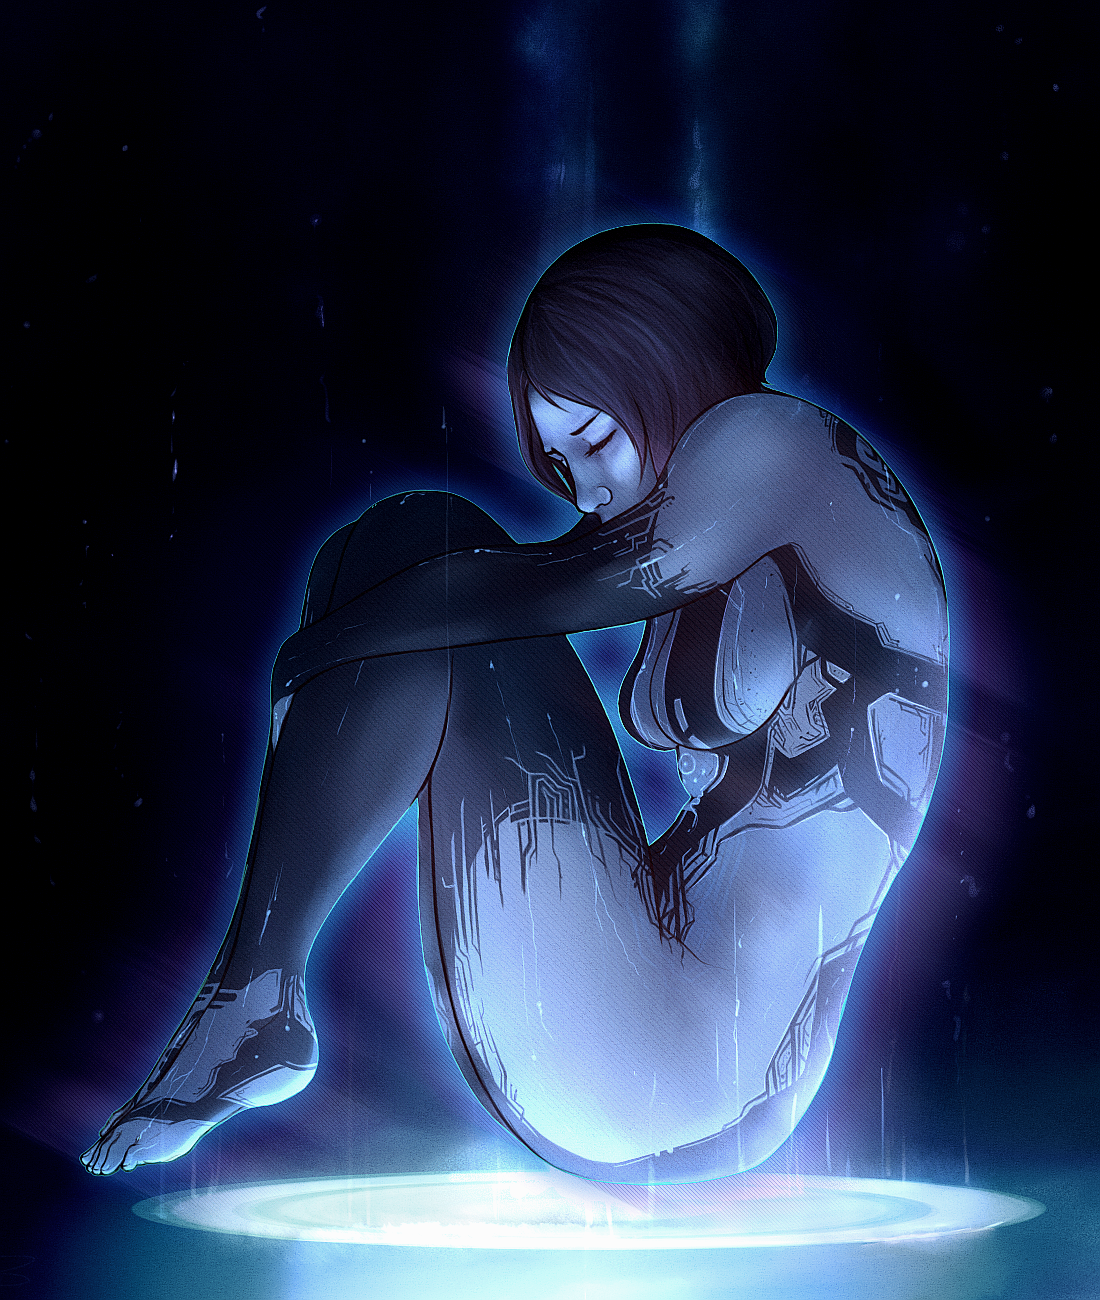 General 1100x1300 Halo (game) Halo 4 fan art thighs blue skin ass big boobs cleavage short hair black hair closed eyes barefoot bare bottom 2D Cortana (Halo) video games video game art DeviantArt video game characters science fiction